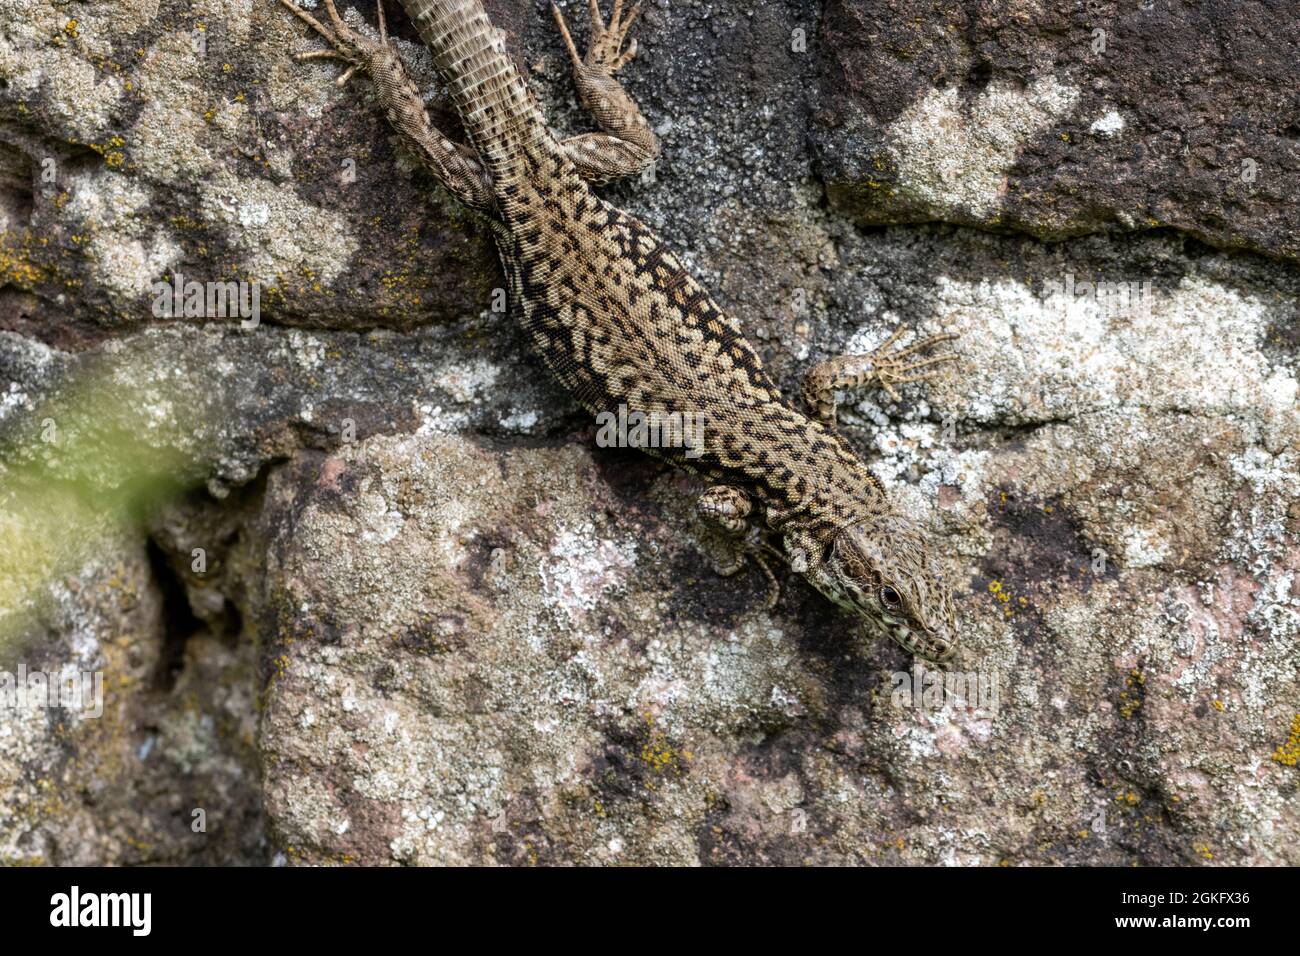 Single Wall Lizard on rocky wall in natural setting Stock Photo